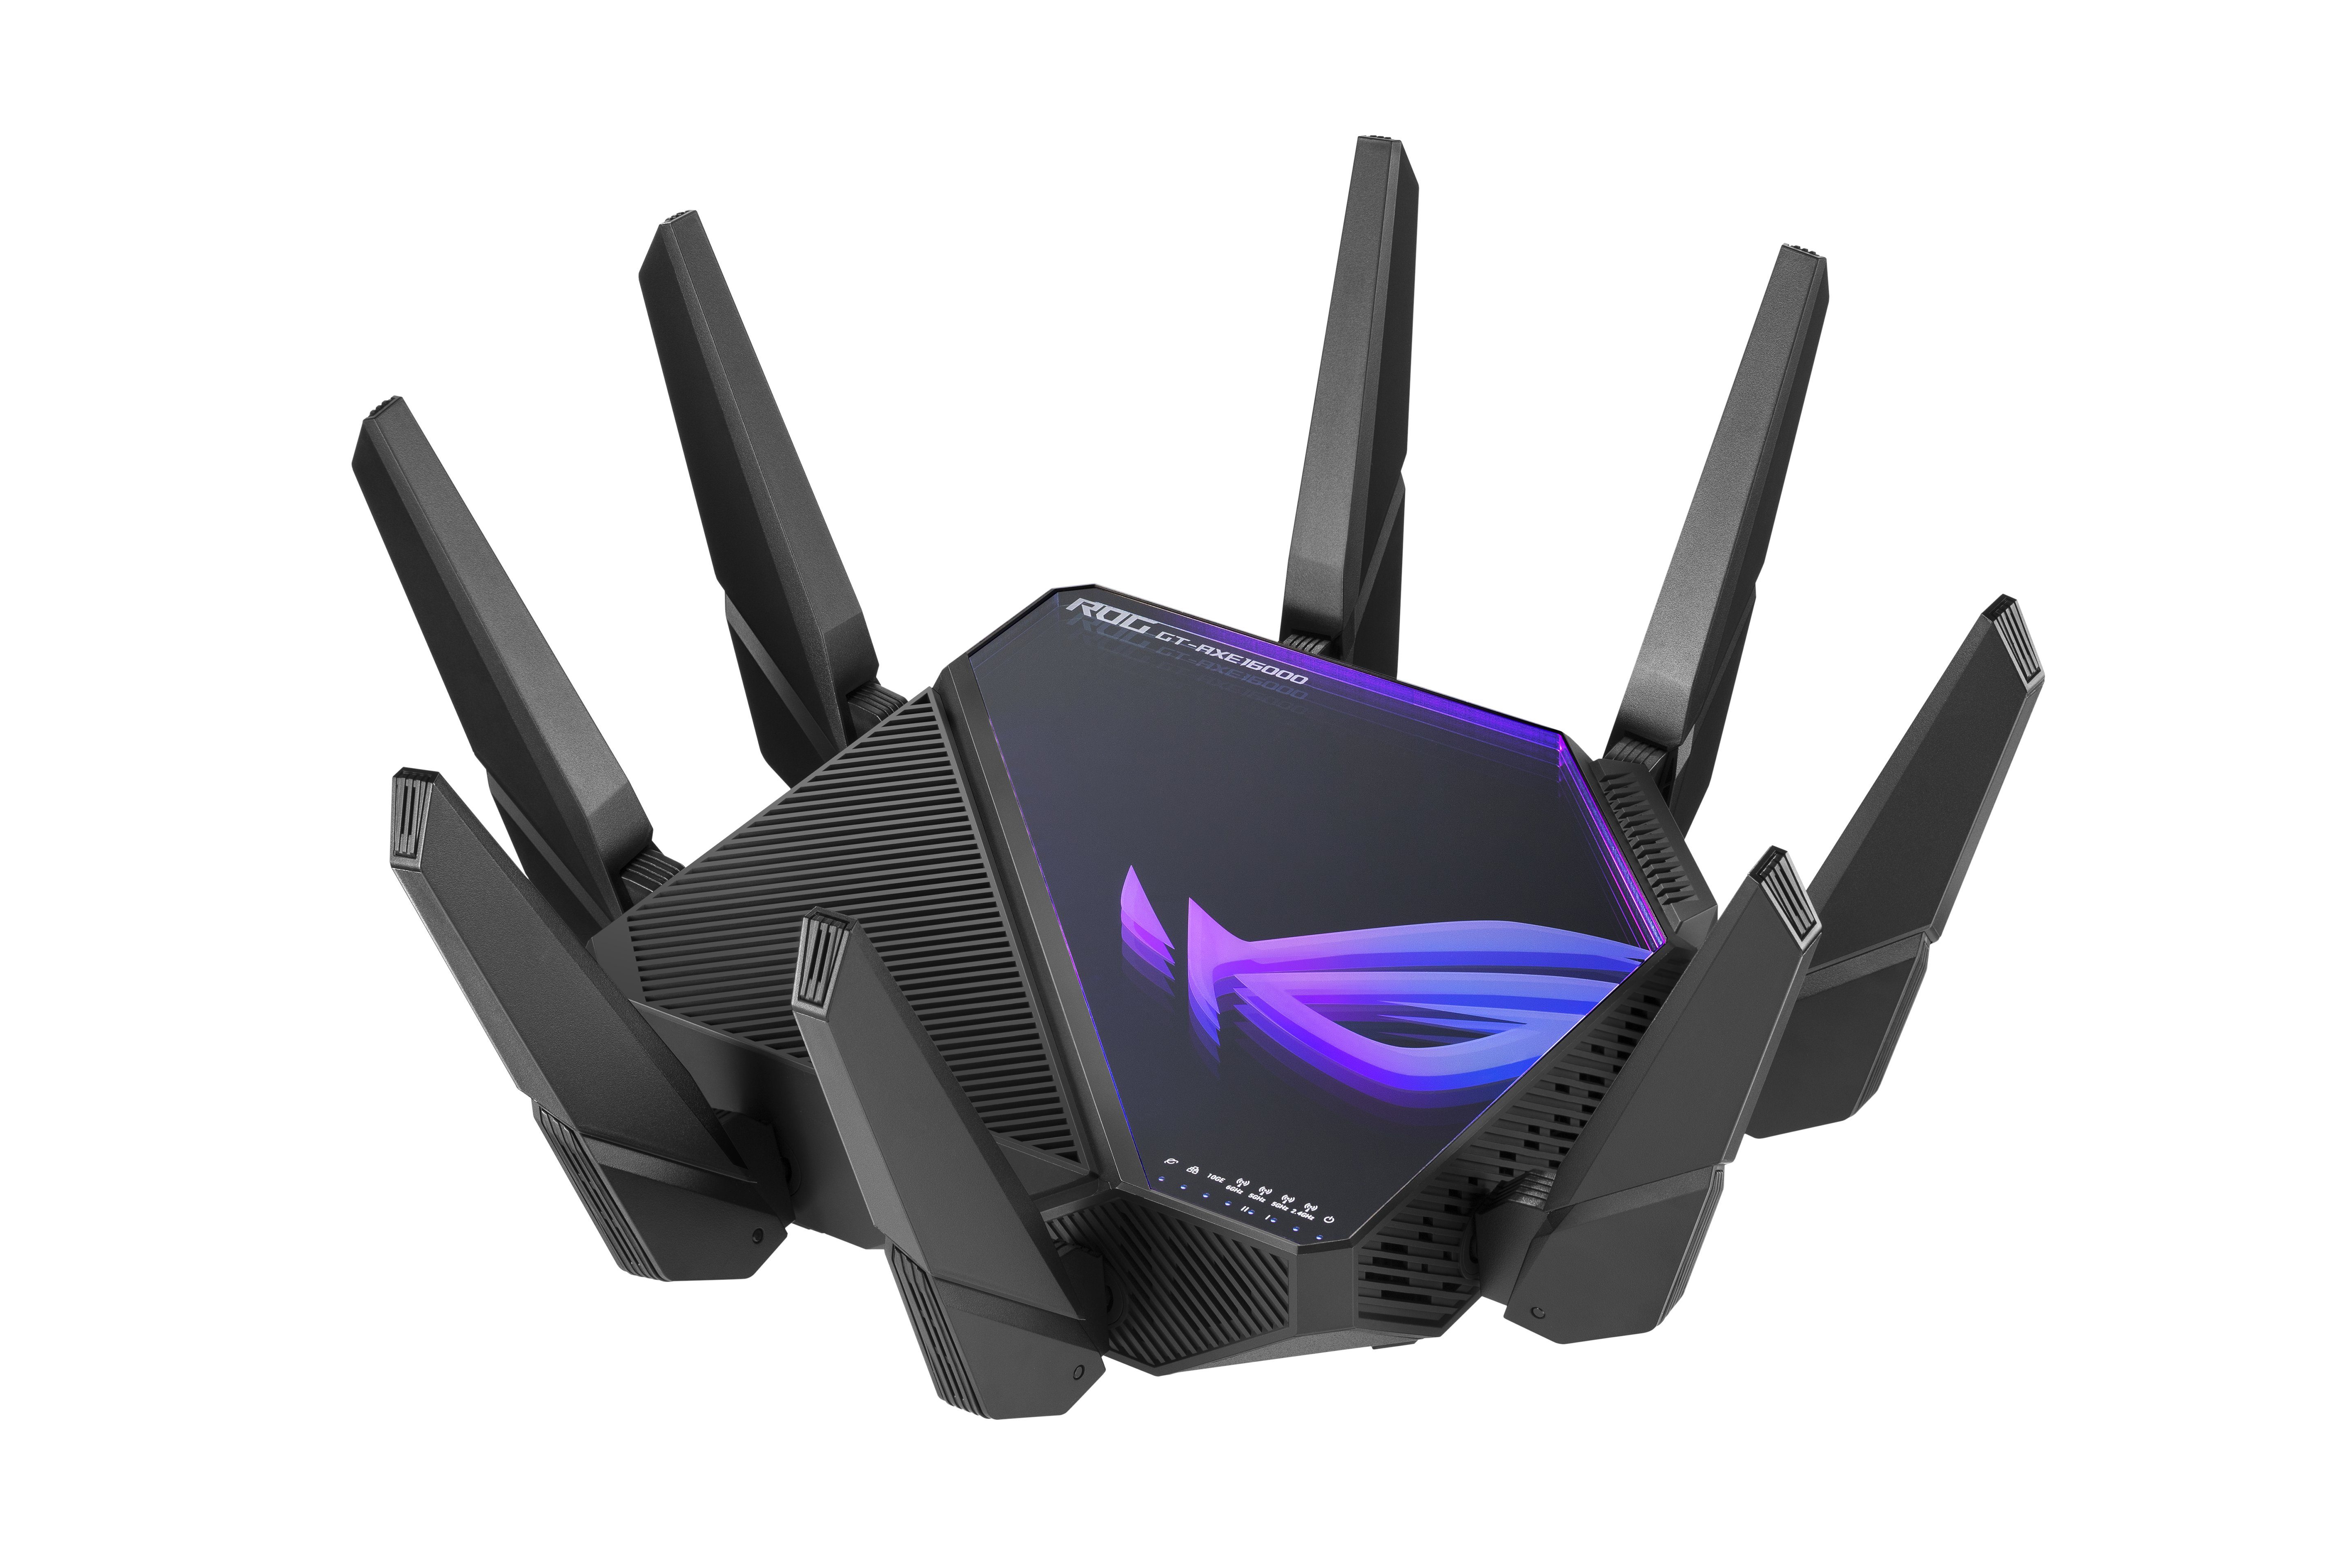 WLAN-Router 6 Router ROG GT-AXE16000 Rapture Asus AiMesh Asus WiFi